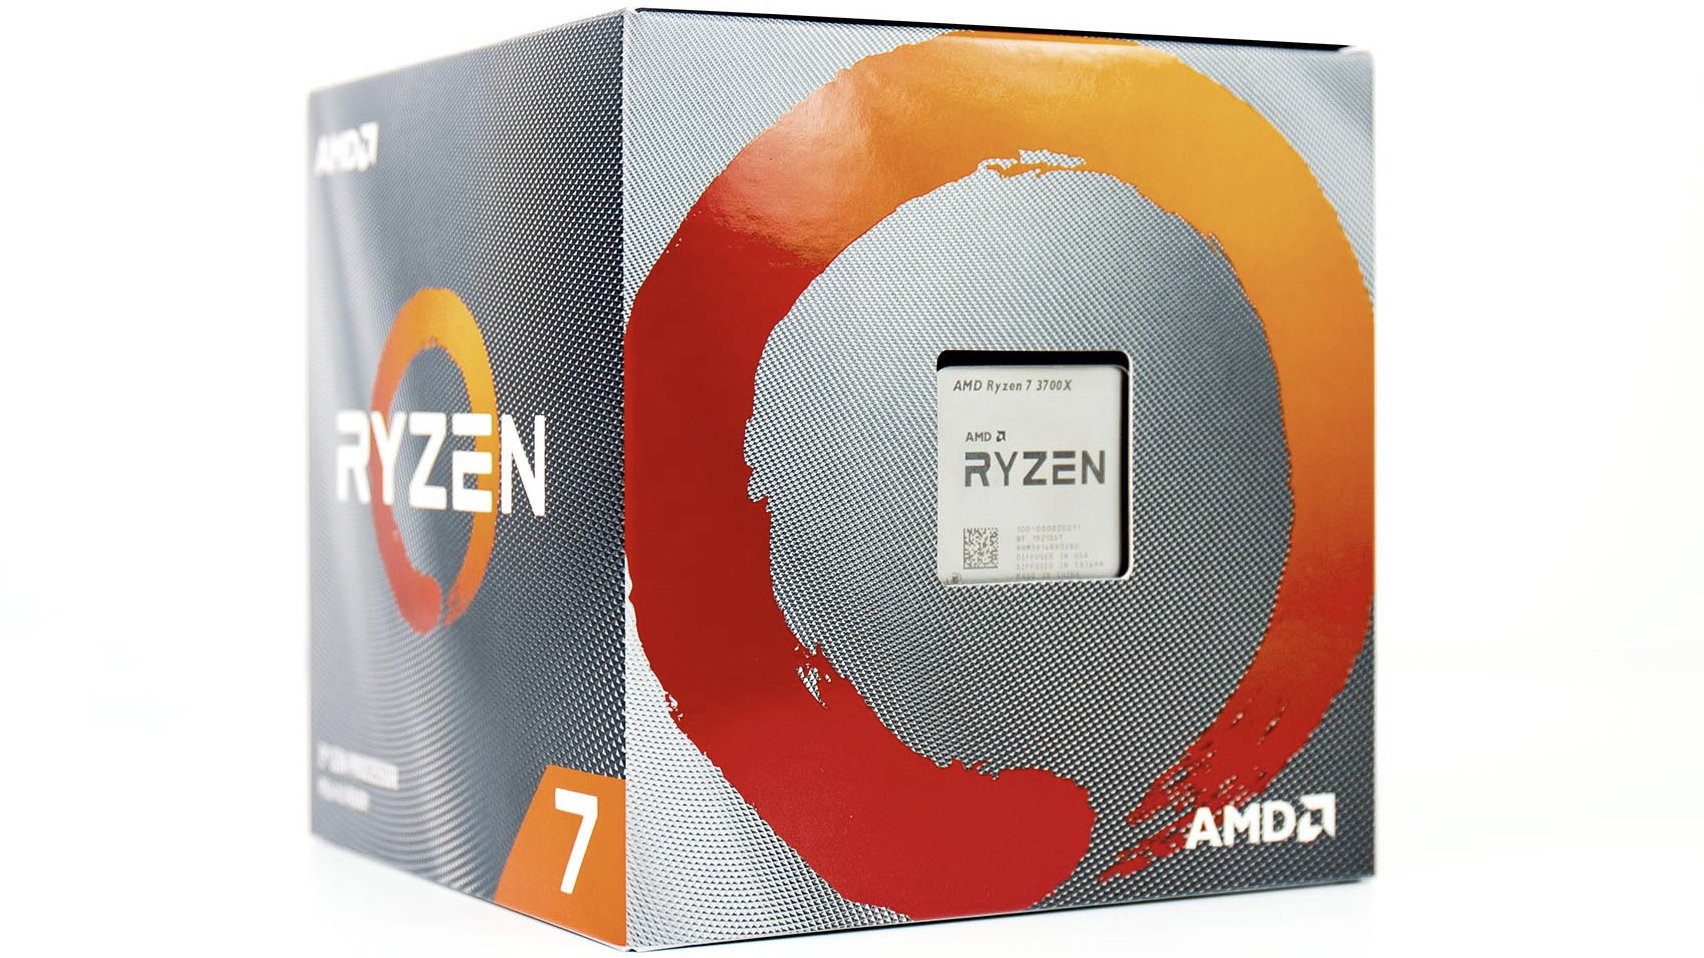 AMD's Ryzen 7 3700X processor is just $275 right now, its lowest